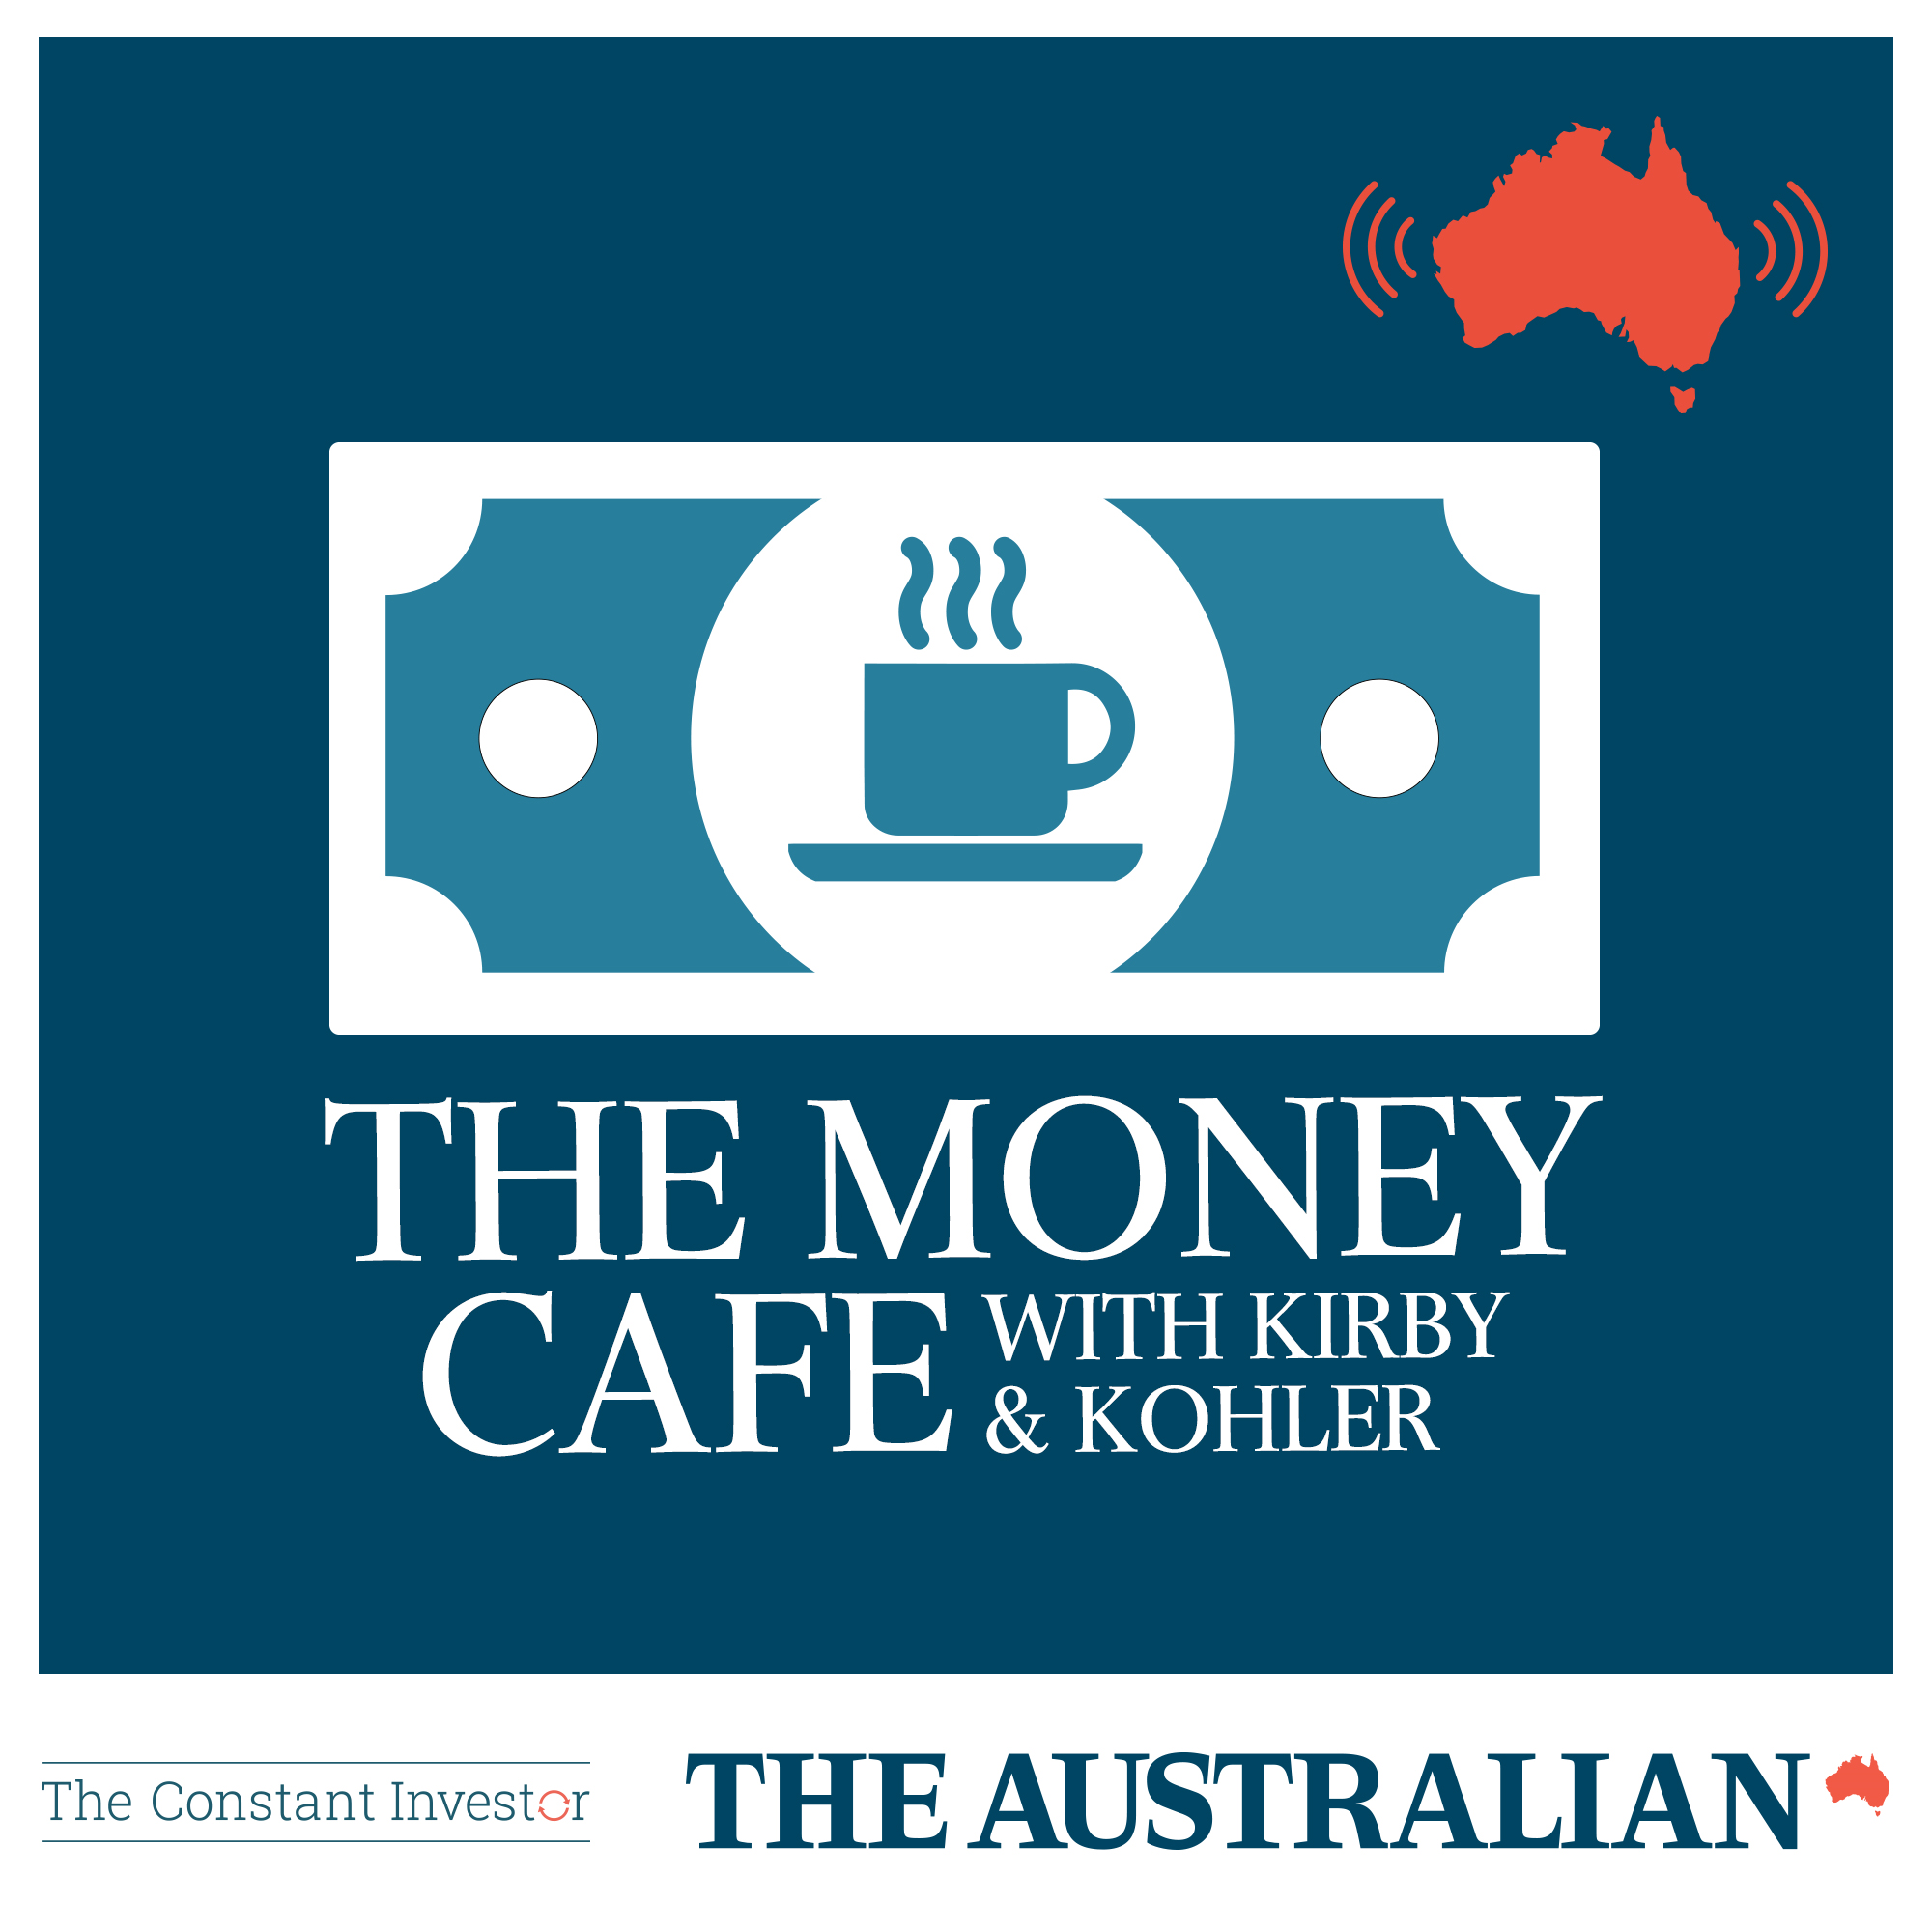 The Money Cafe with Kirby and Kohler - 1 March 2018